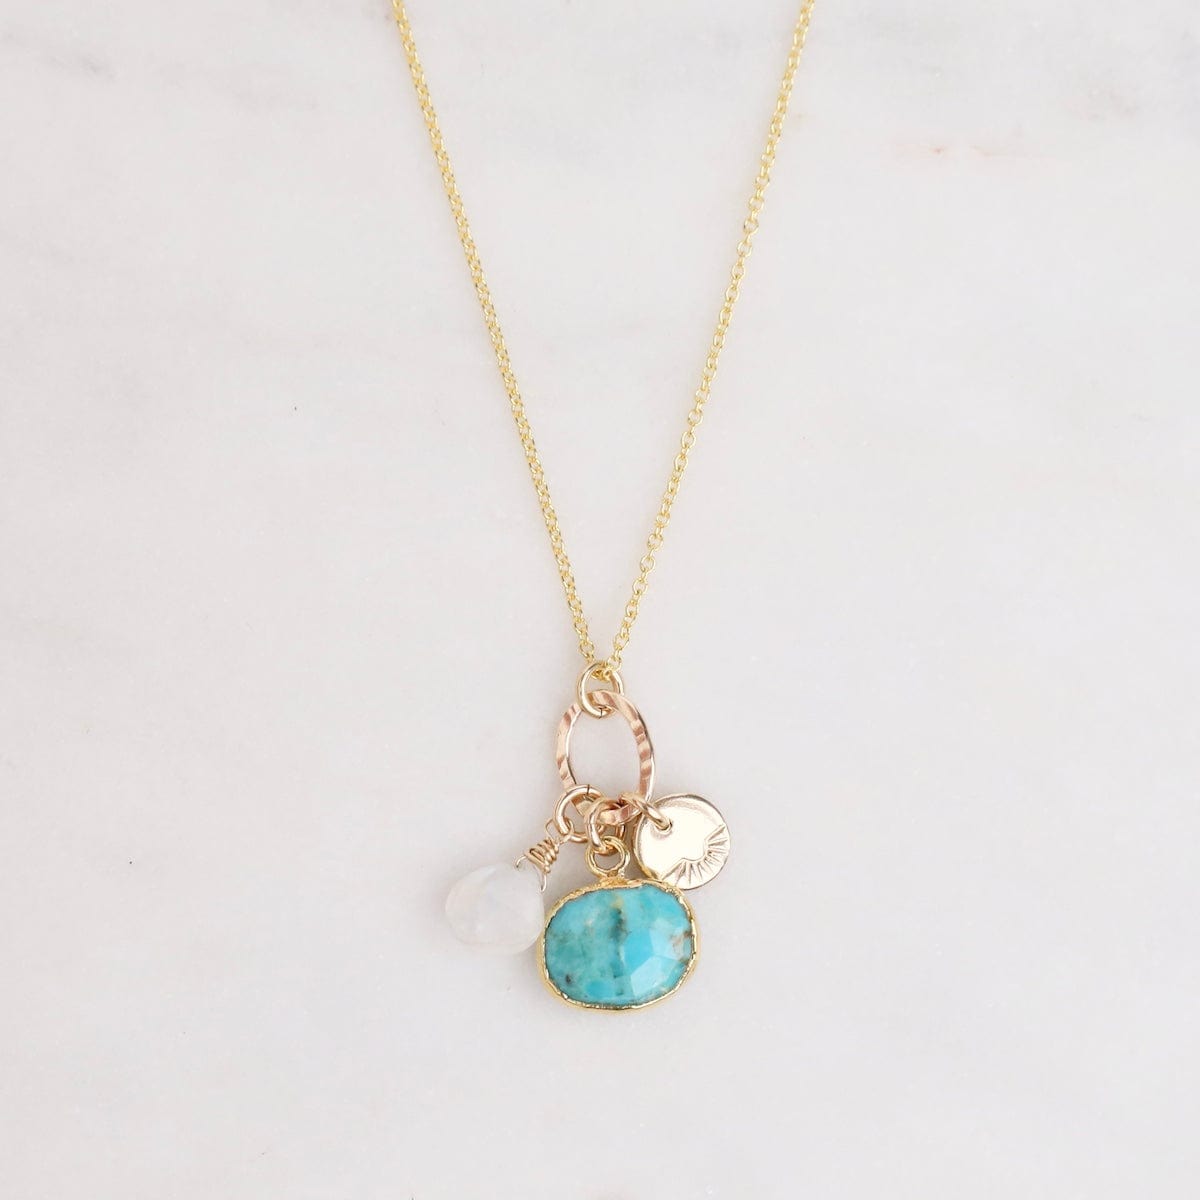 NKL-GF Turquoise & Moonstone Charm Necklace